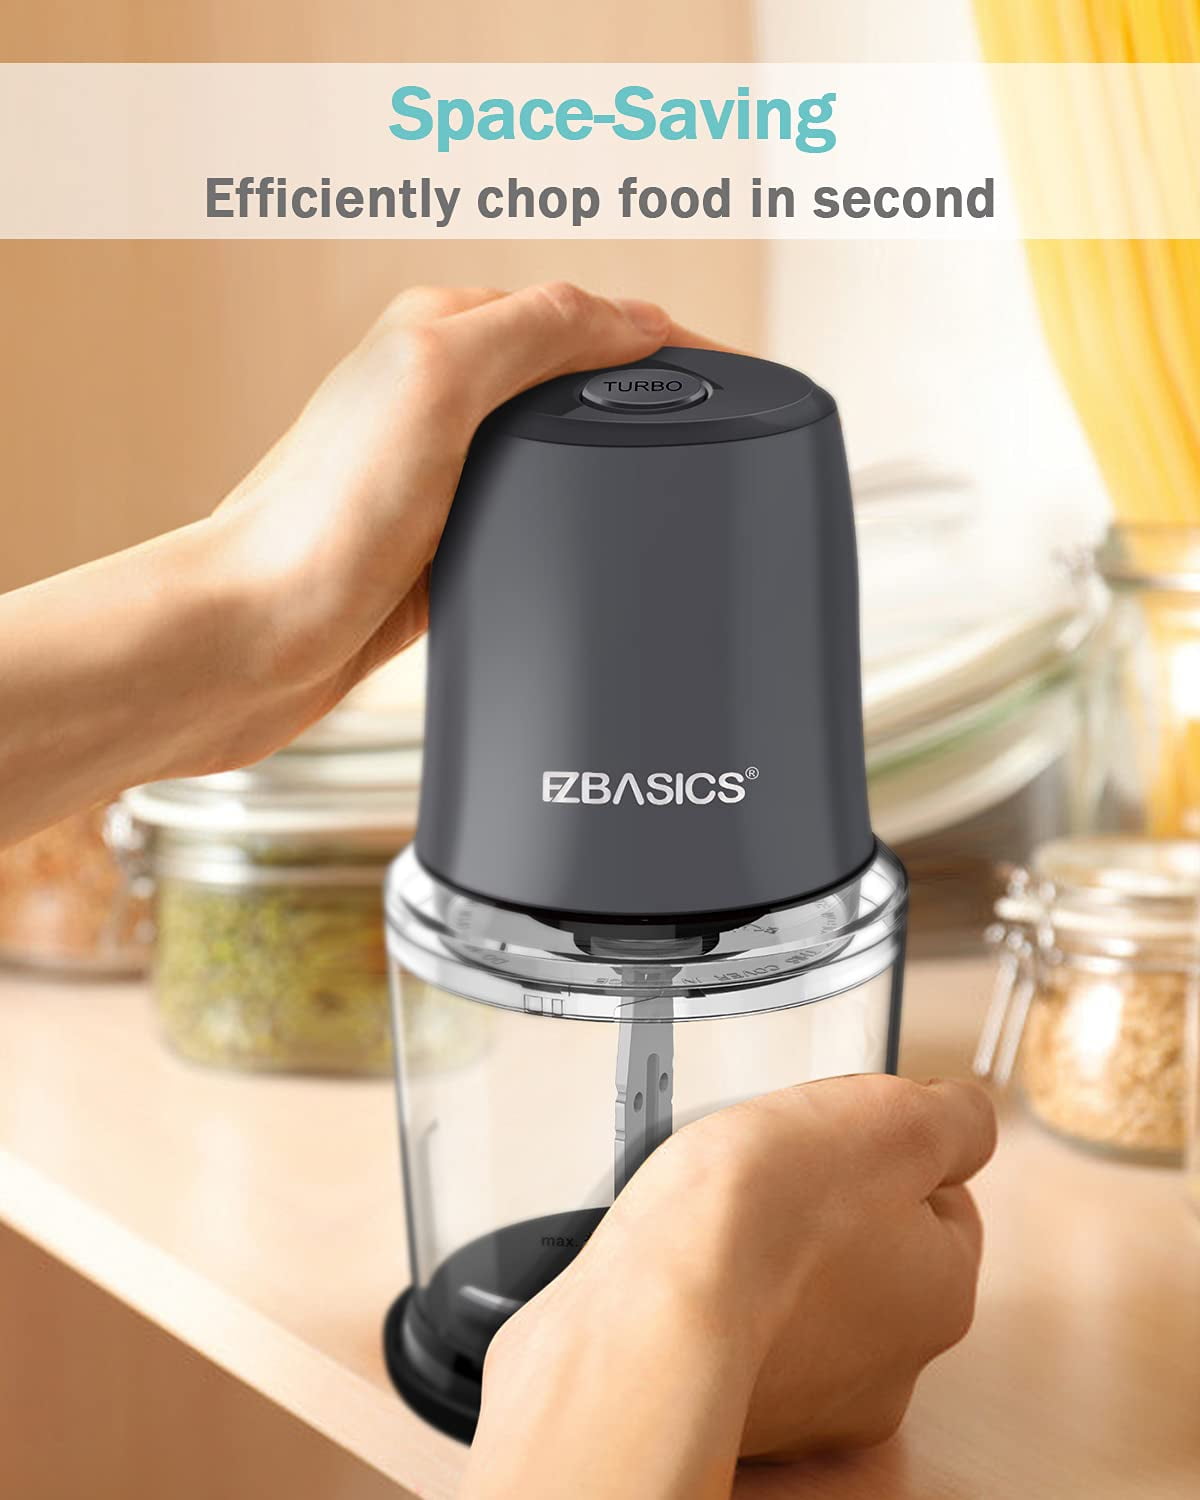 Food Processor - Acekool Small Electric Food Chopper for Vegetables Meat Fruits Nuts Puree - 300W 2 Speed Kitchen Mini Food Processor with Sharp